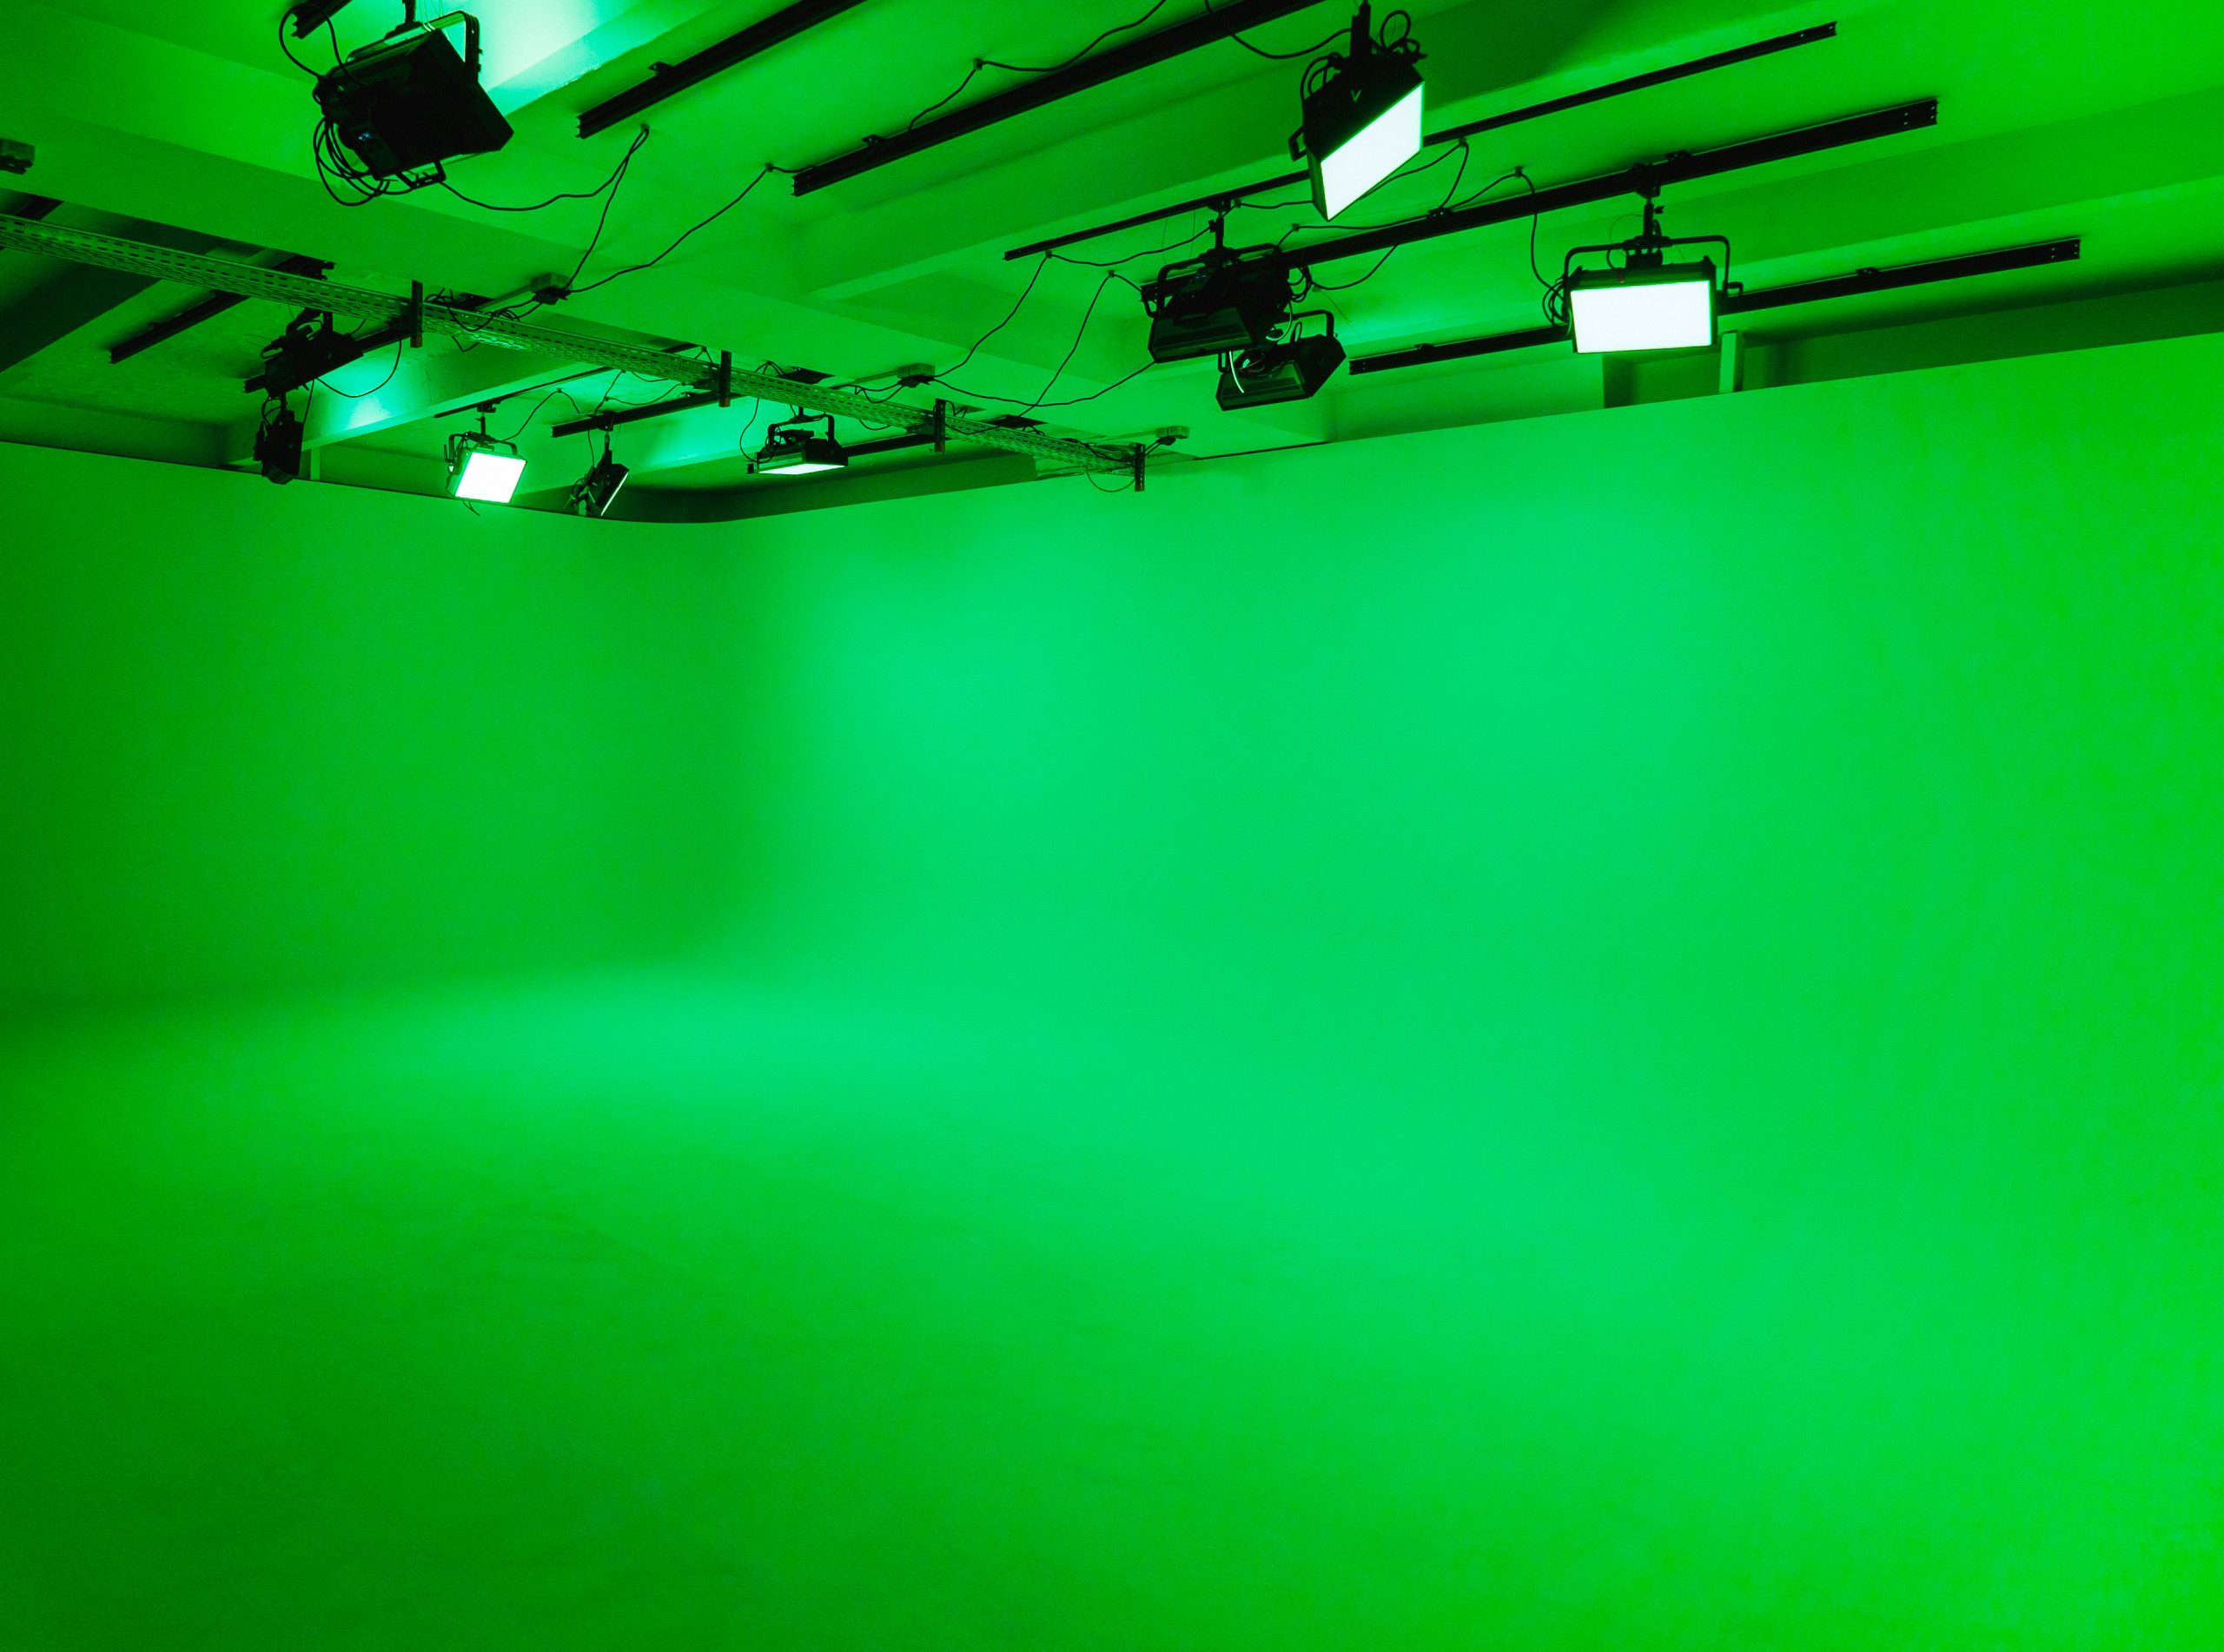 The huge cyclorama has been completely illuminated in green